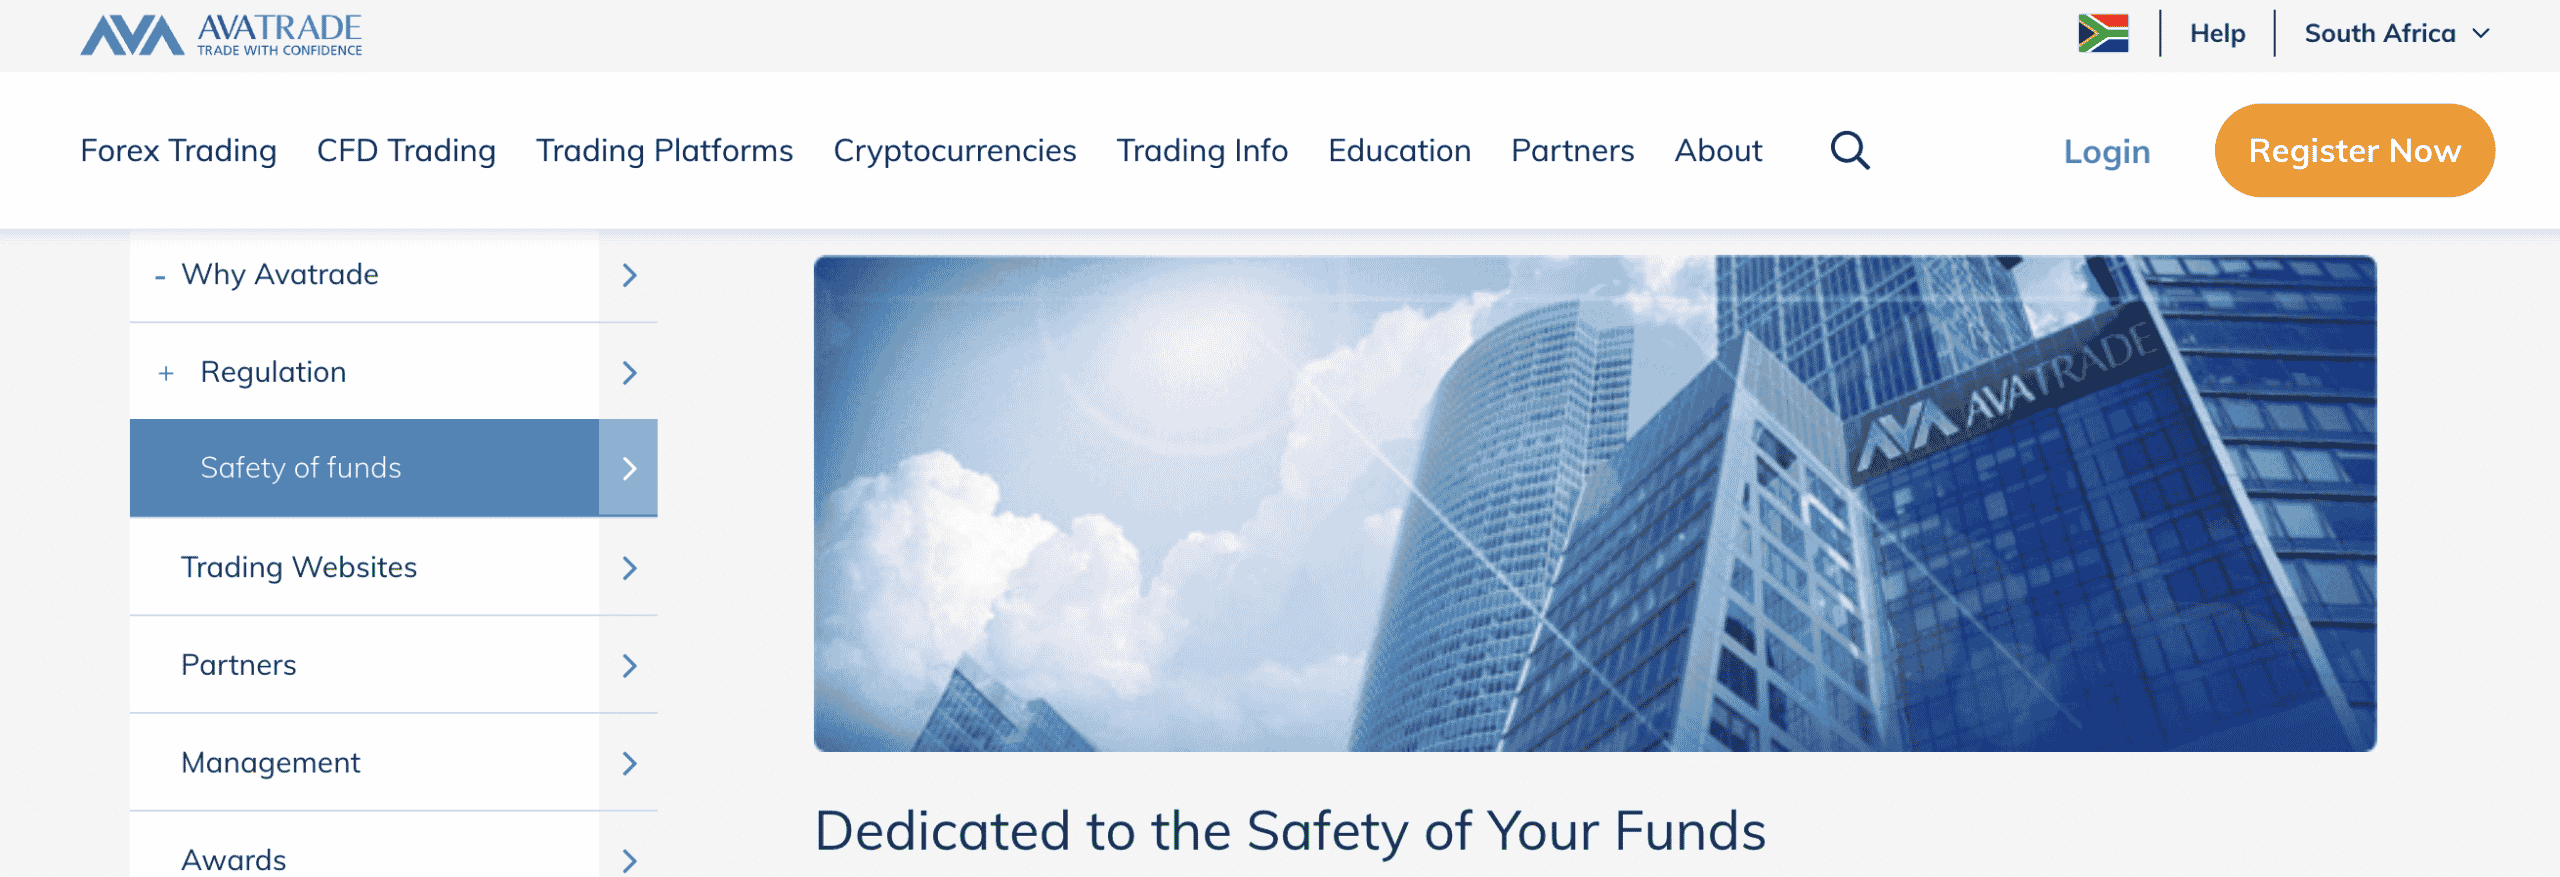 AvaTrade Client Fund Security and Safety Features